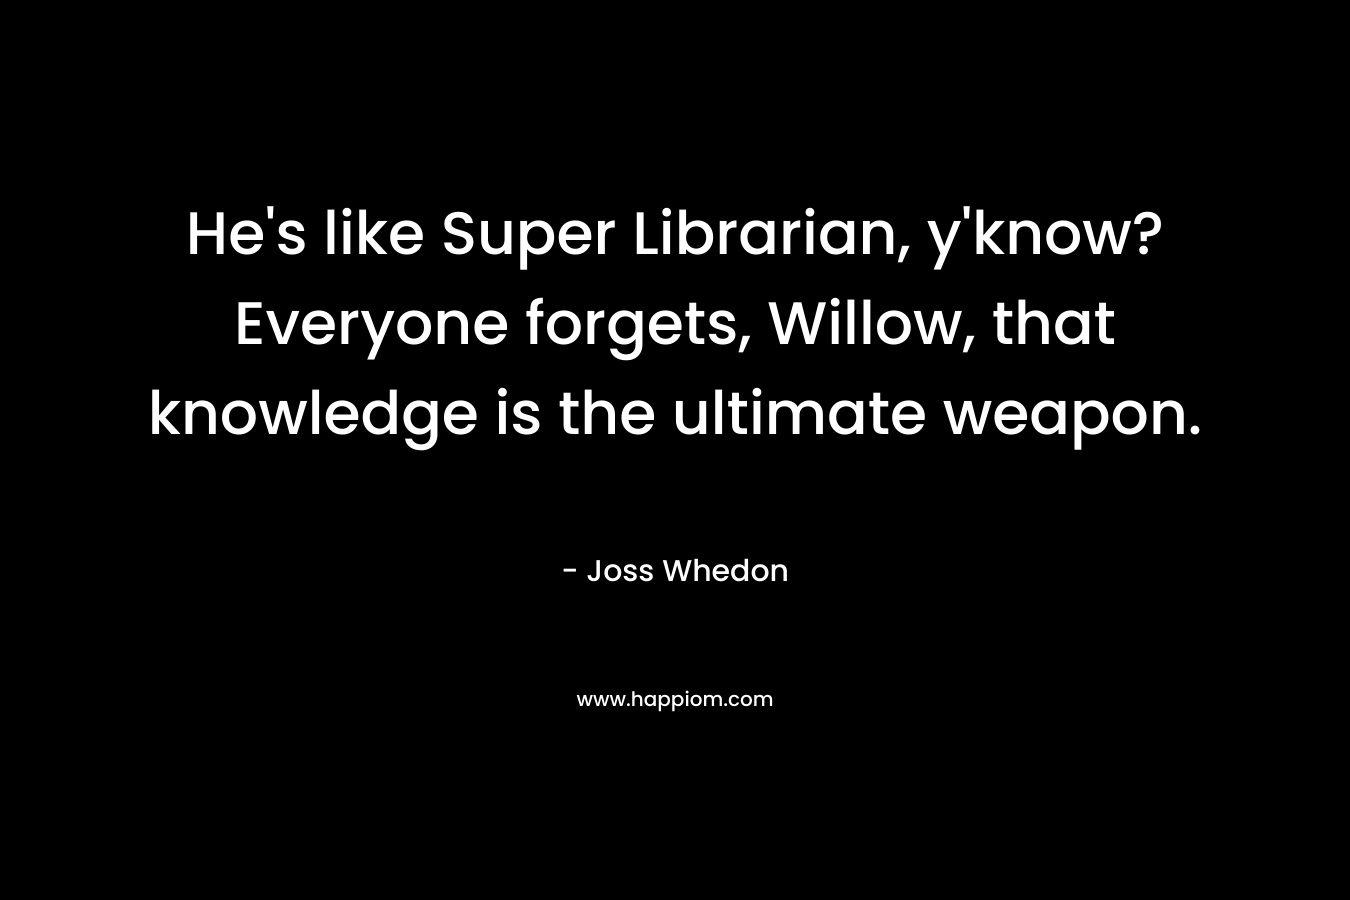 He’s like Super Librarian, y’know? Everyone forgets, Willow, that knowledge is the ultimate weapon. – Joss Whedon